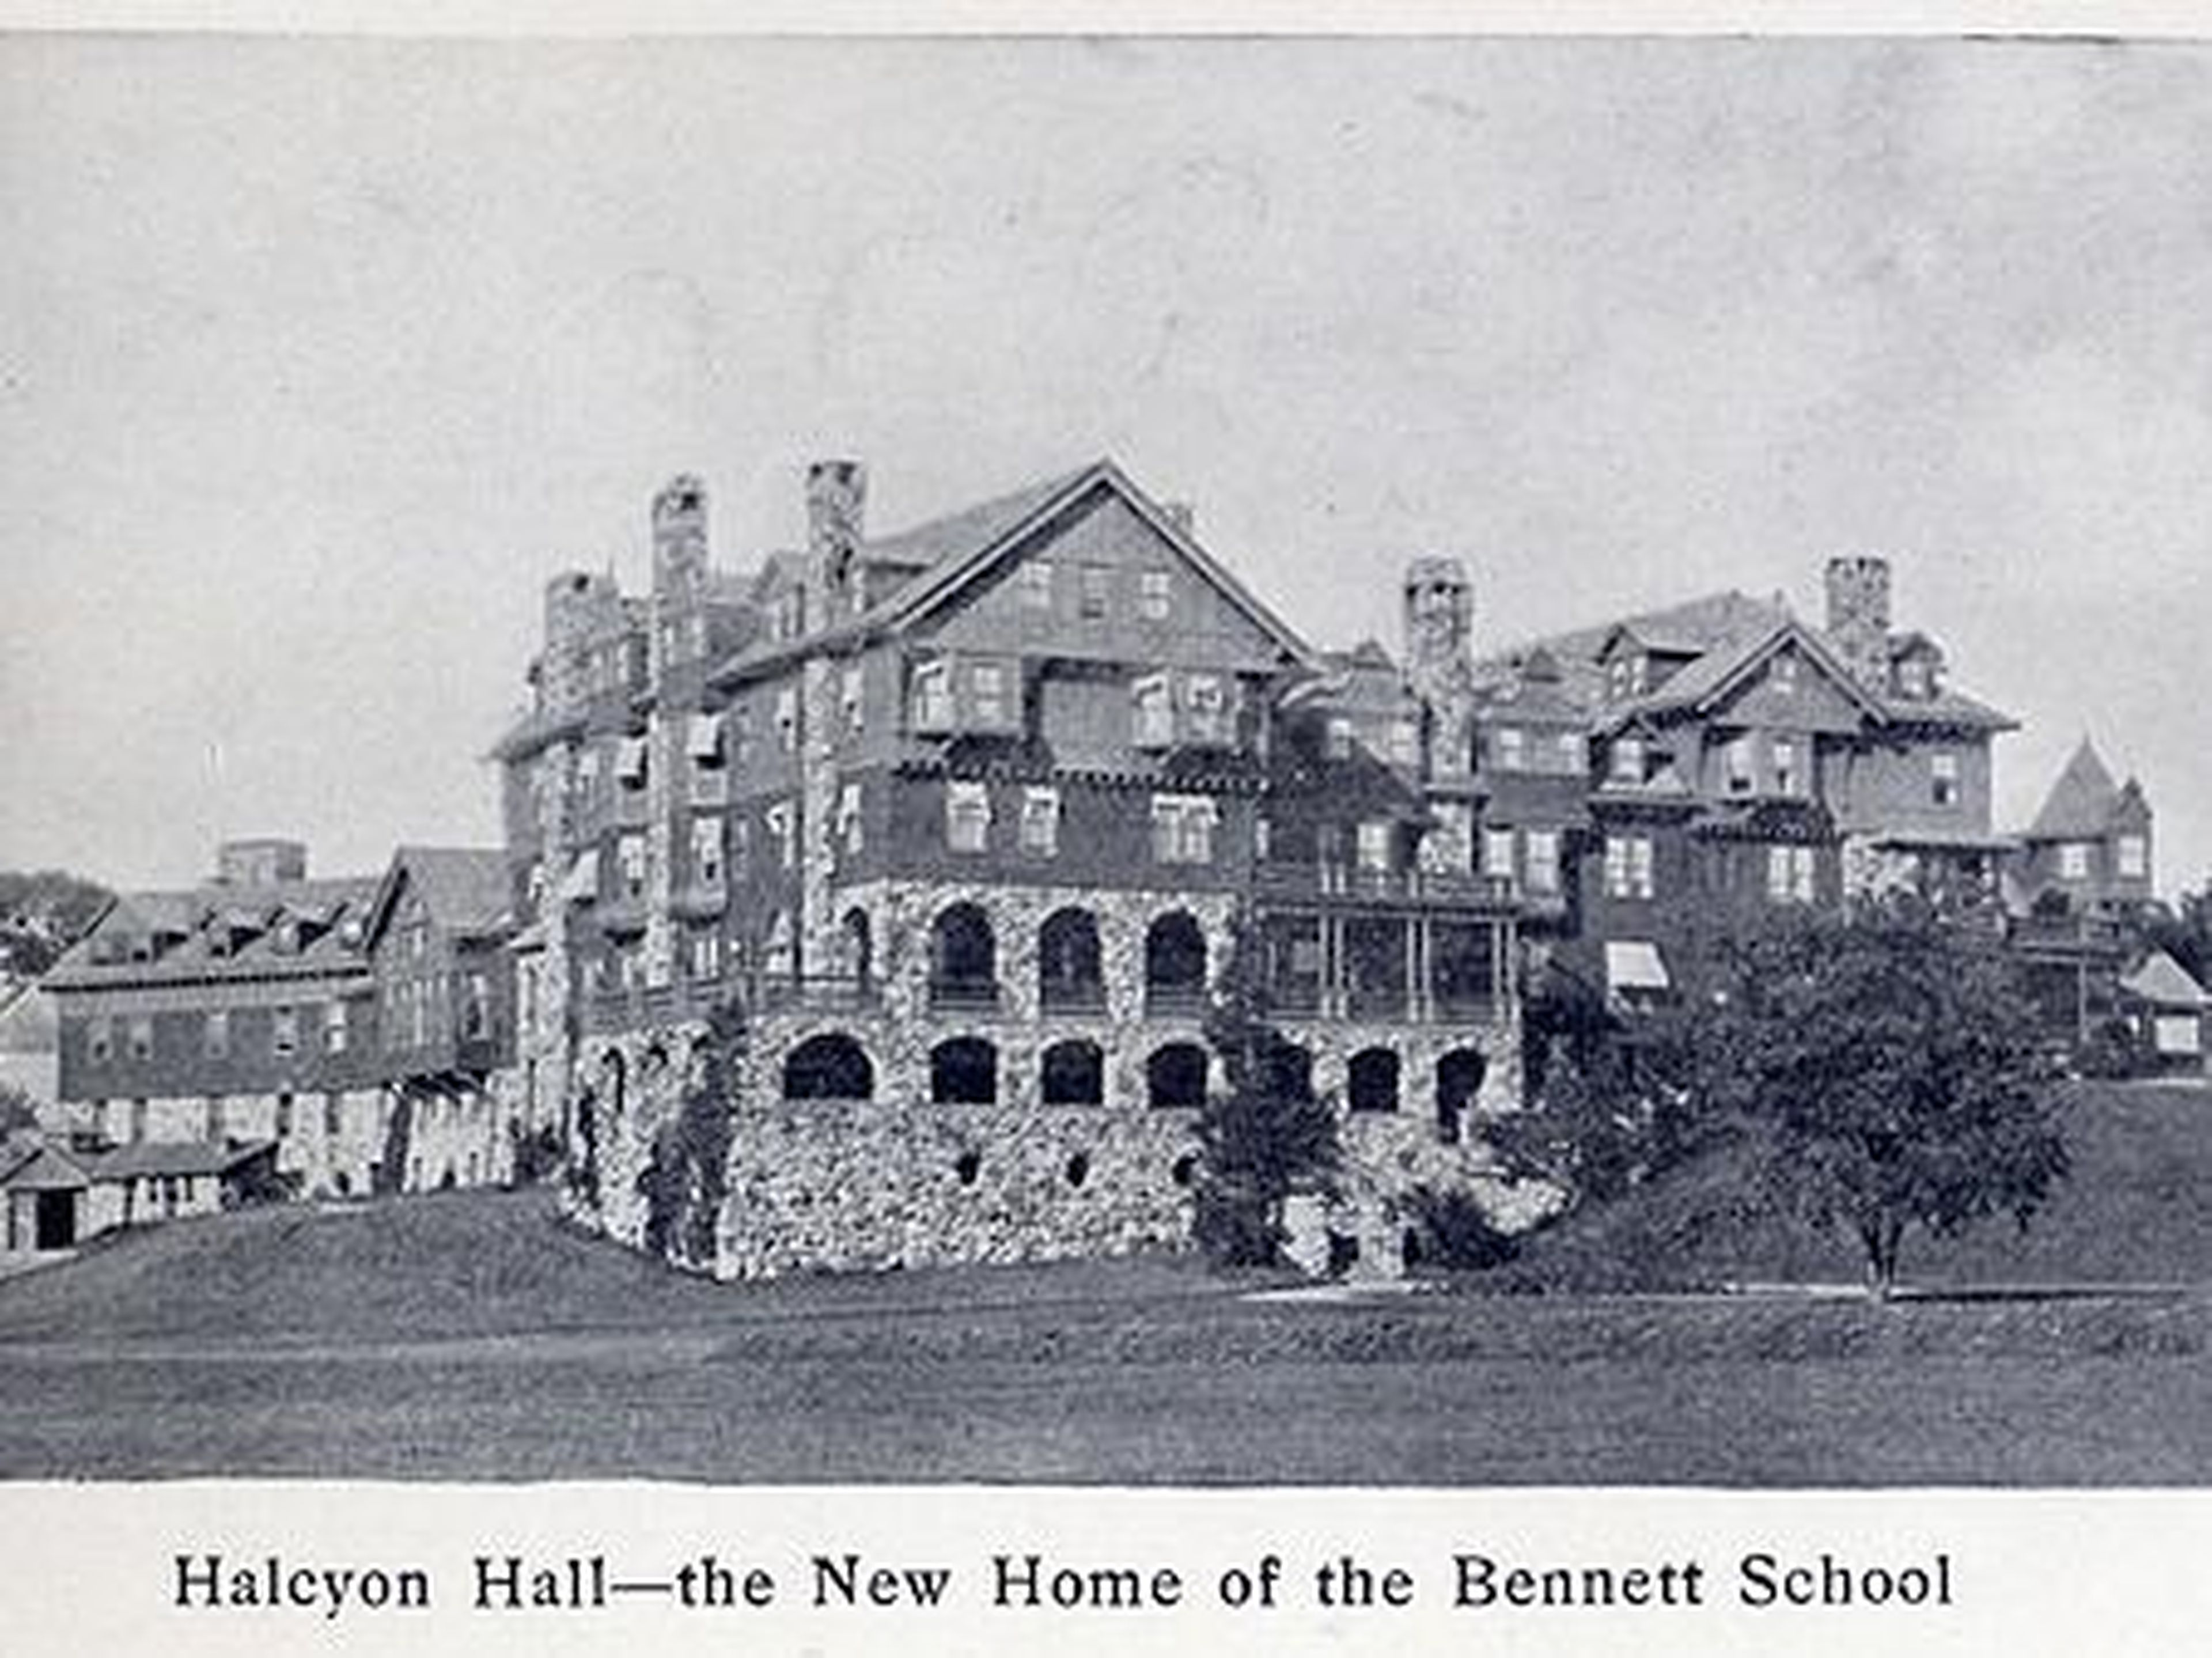 Halcyon Hall in Millbrook, New York was built as a luxury hotel in 1893 and became part of Bennett College in 1907. The women's college closed down in 1978.